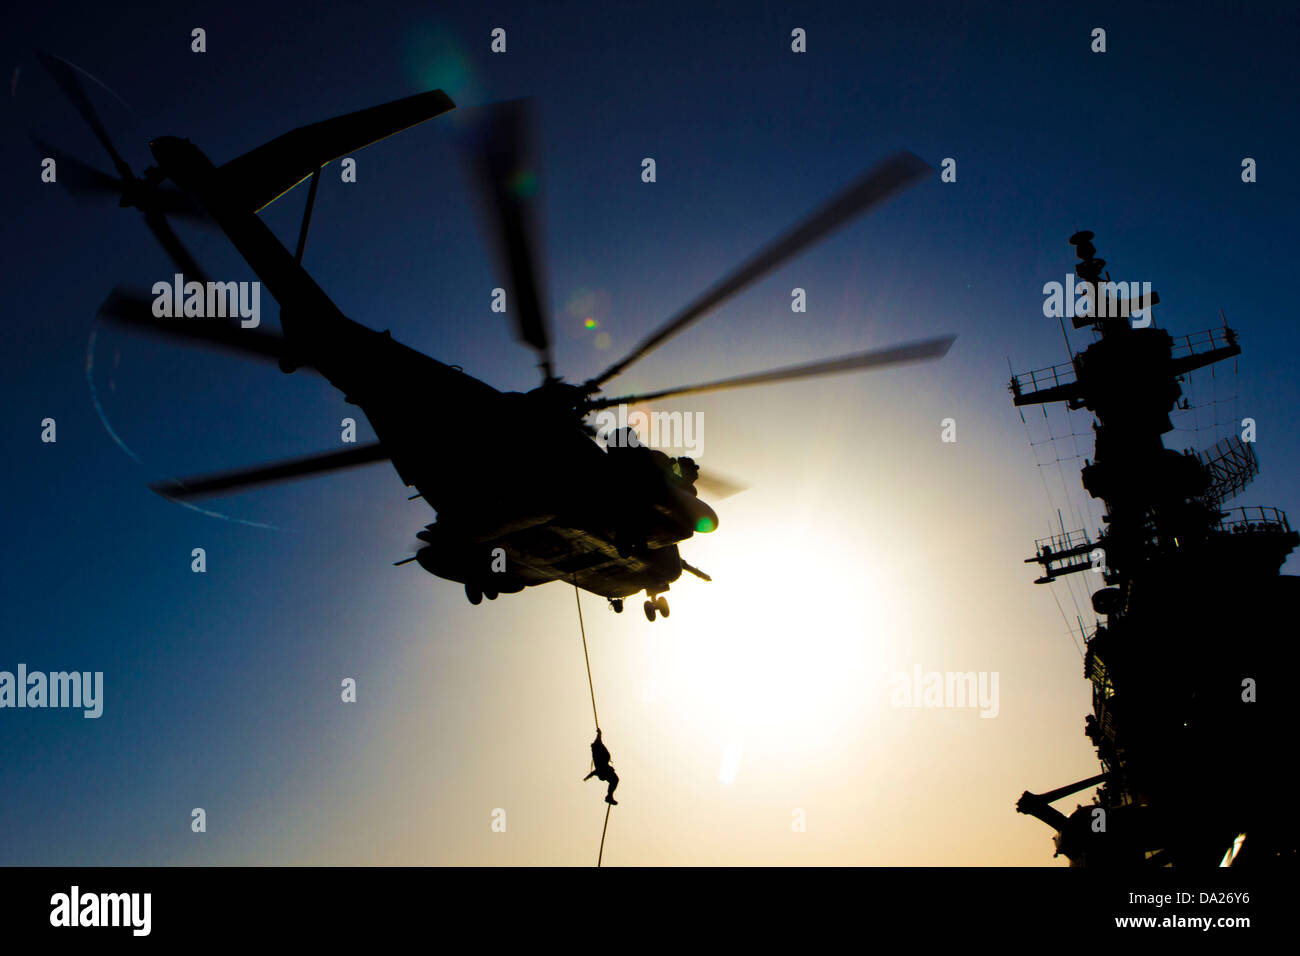 A US Marine assigned to Battalion Landing Team fast ropes from a CH-53 Super Stallion helicopter during familiarization training on the flight deck of the USS Kearsarge June 30, 2013. Stock Photo